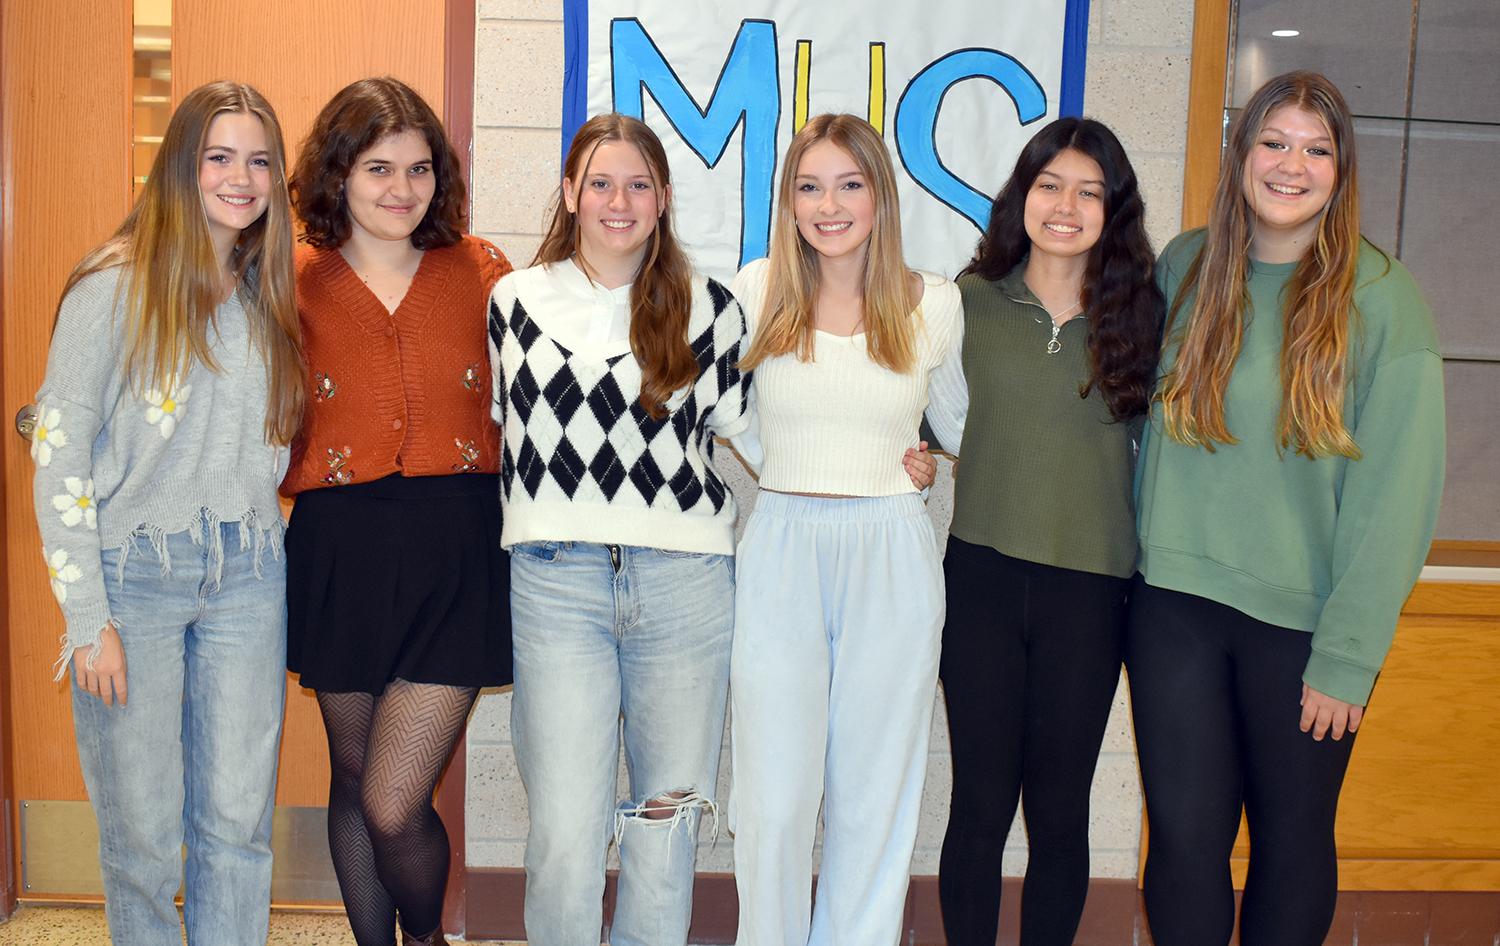 Mars Area High School students Addison Nailler (alternate), Madalyn Gribble (alternate), Lauren Karg, Miranda Gehm, Isabela Montes and Victoria Rojas were selected to join in the PMEA District 5 Honors Chorus Festival.